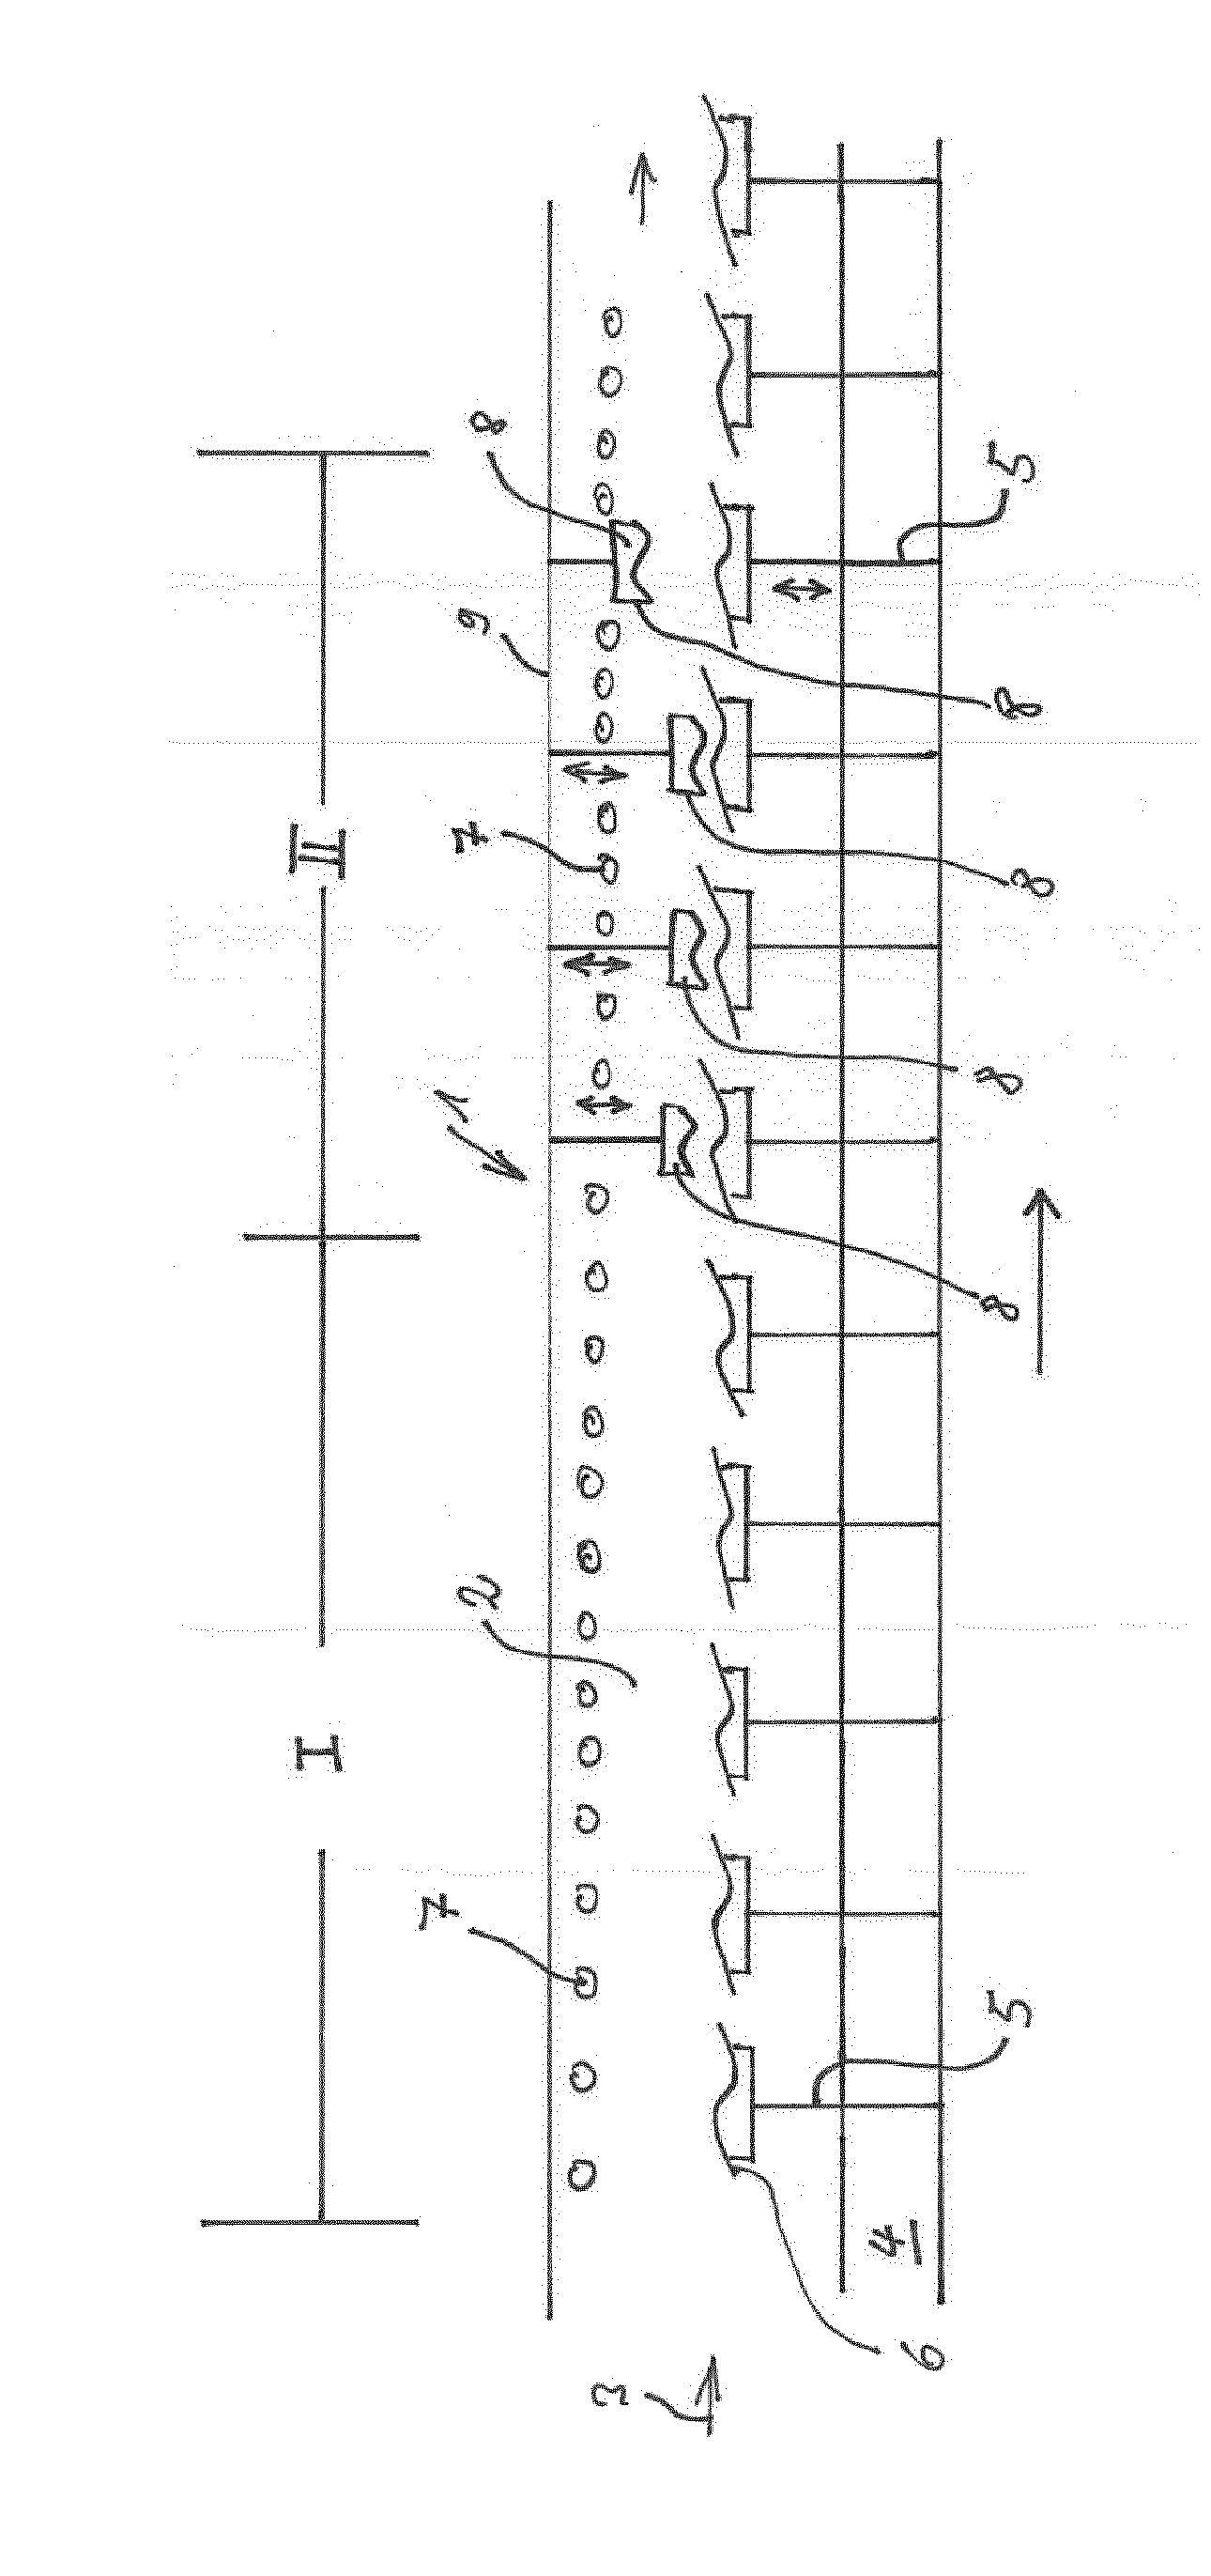 Method and device for partially hardening sheet metal components